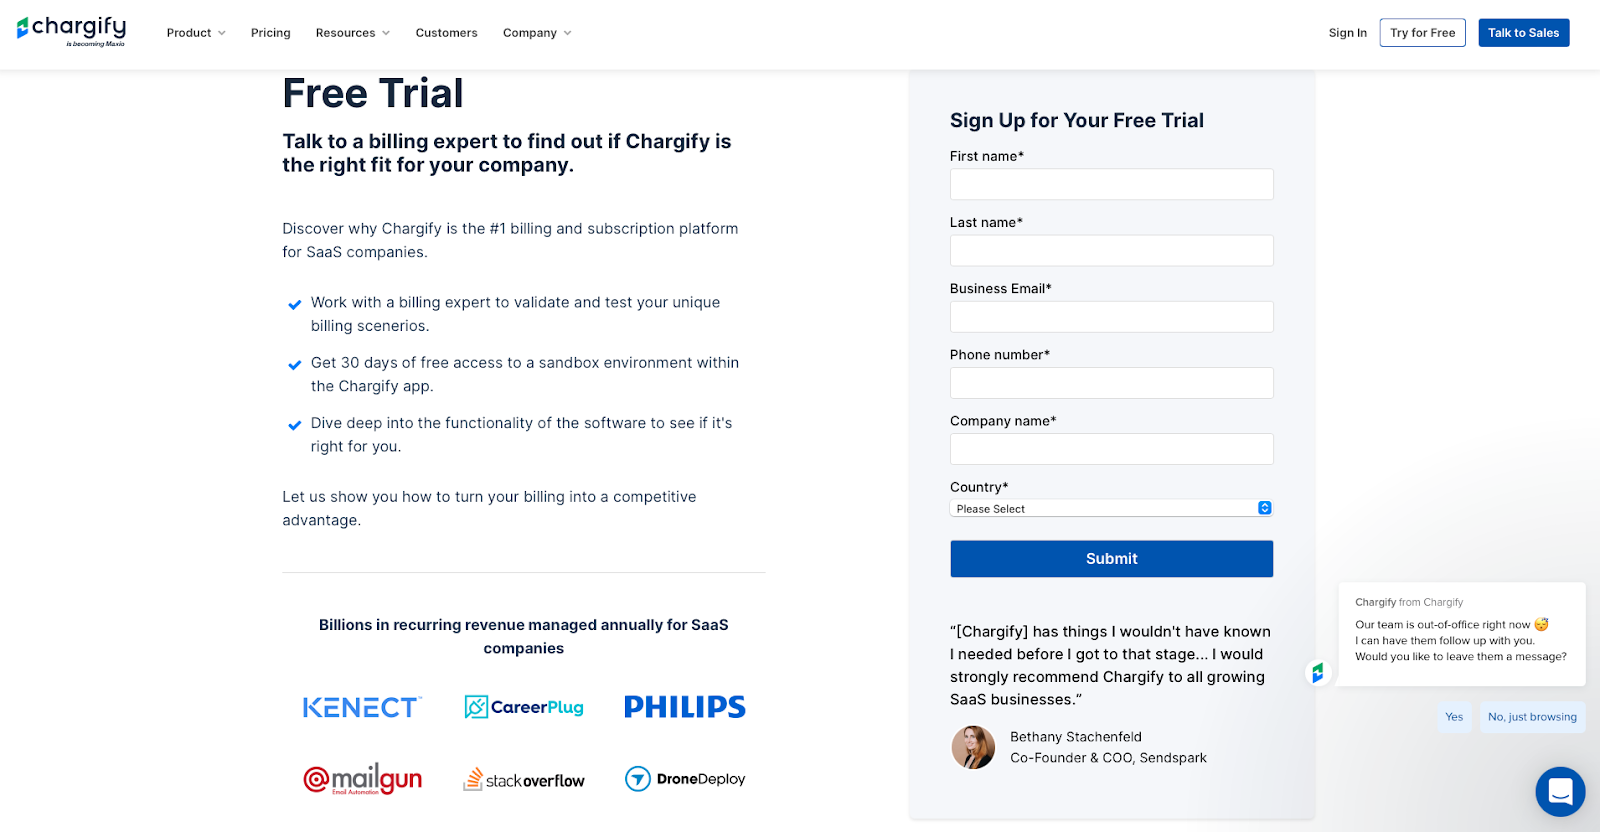 Chargify's Free Trial Landing Page